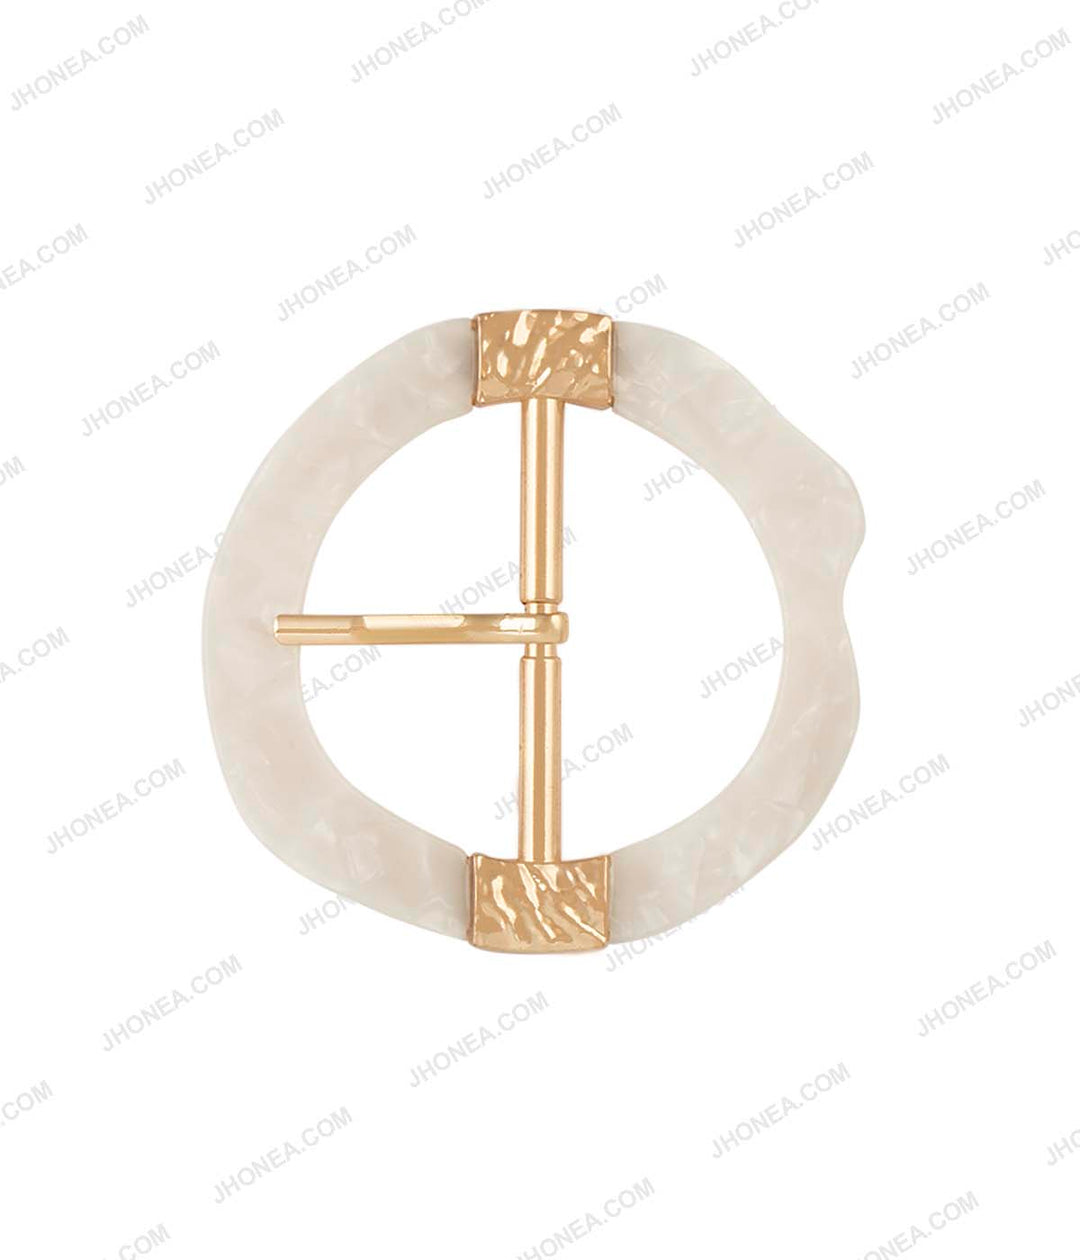 Buy your Oval centre bar buckle solid brass 12,5 mm (gold) online